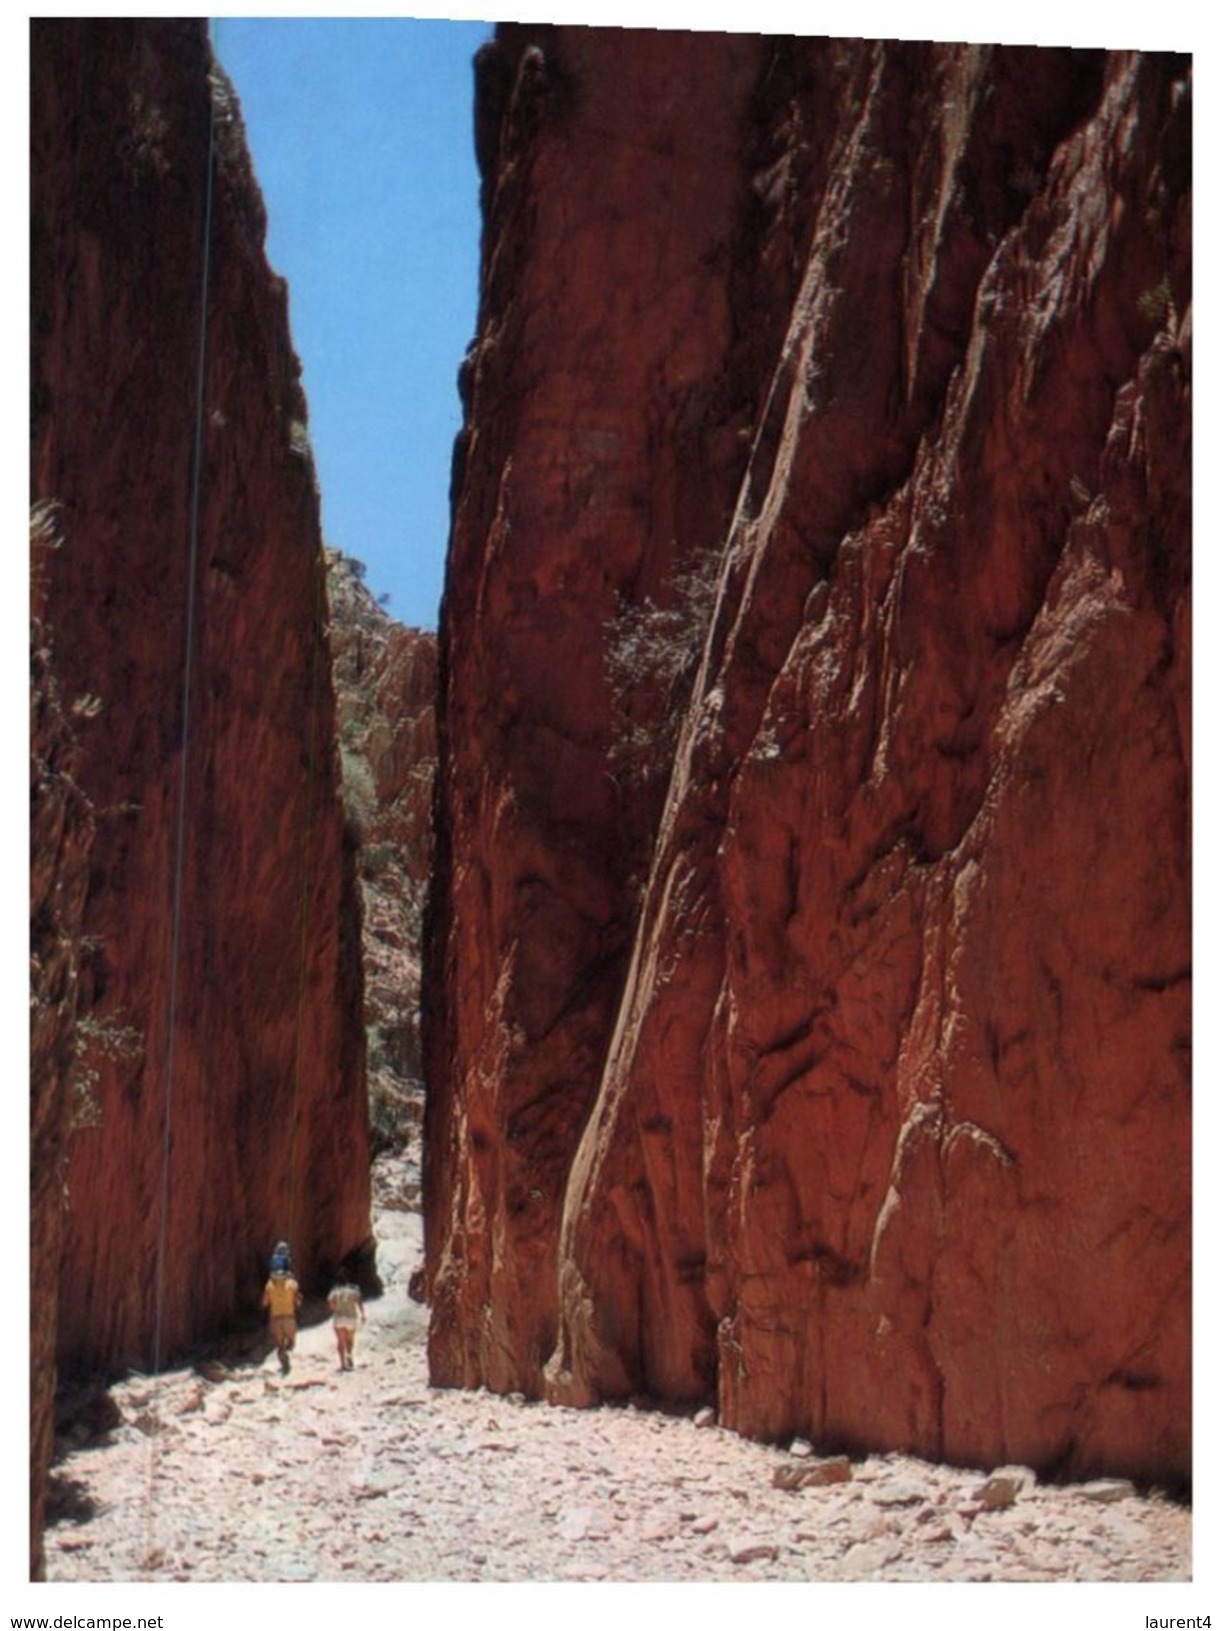 (800) Australia - NT - Standley Chasm - The Red Centre